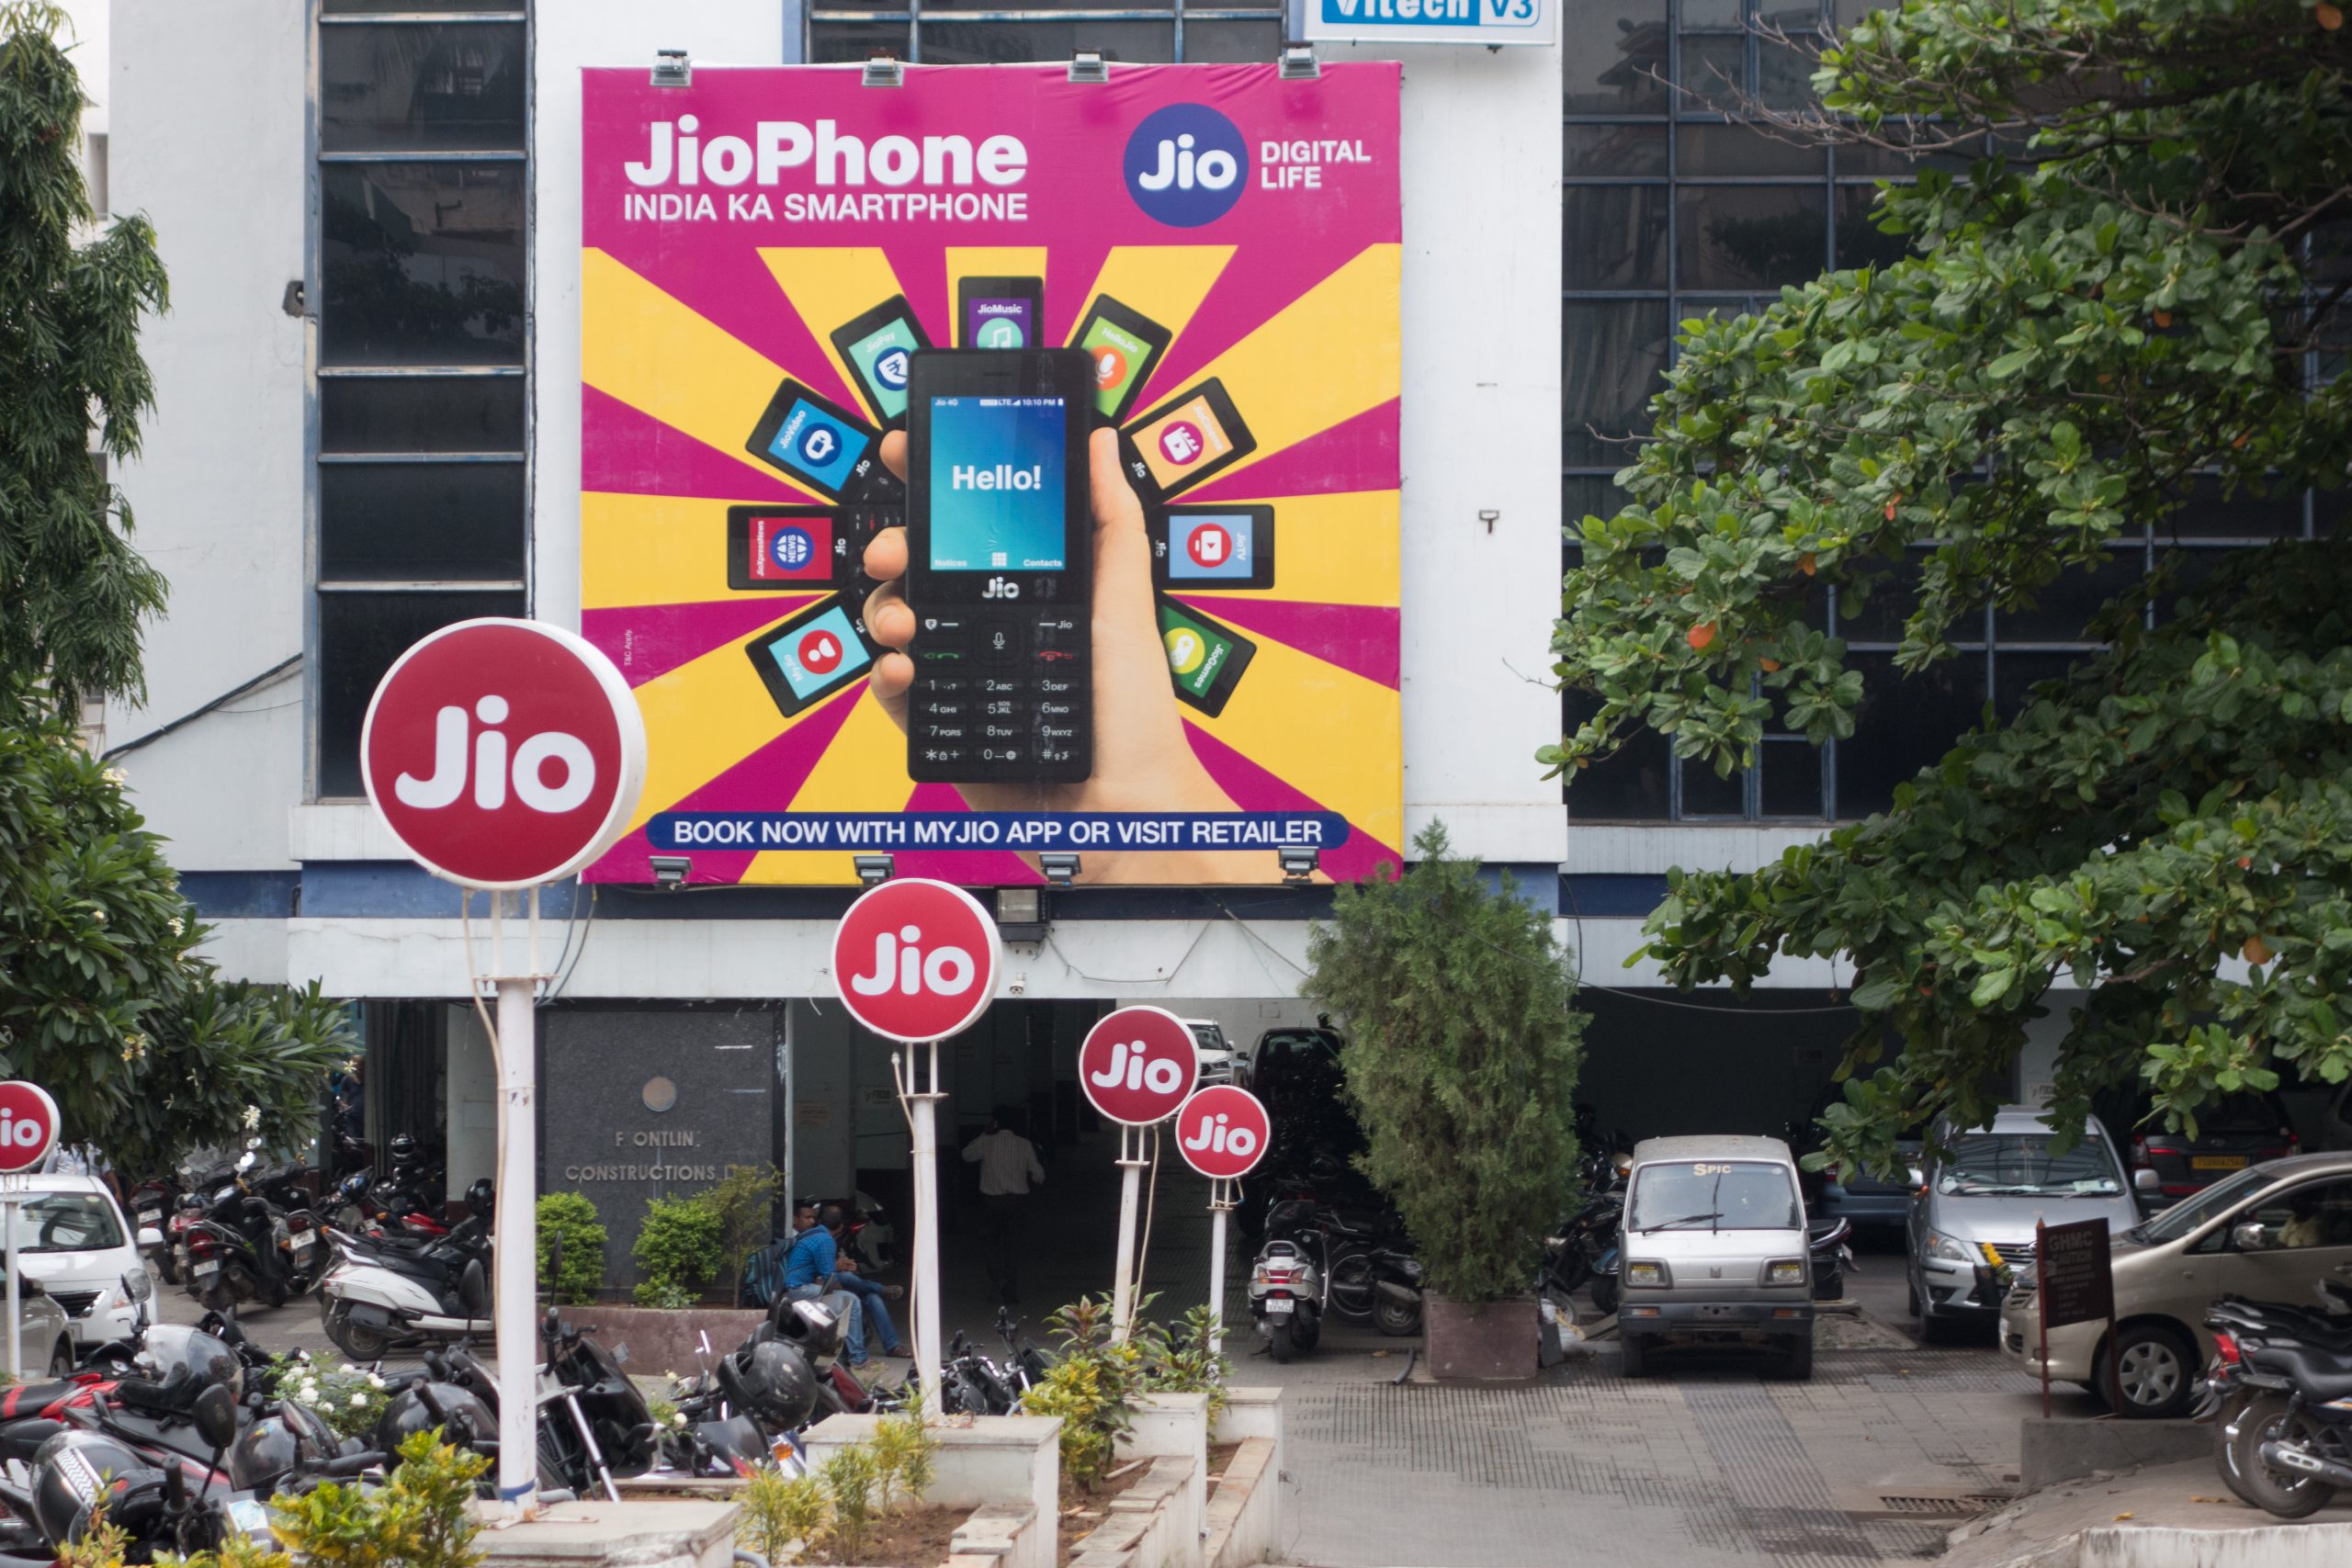 Reliance further dilutes Jio Platforms’ equity as KKR invests USD 1.5 billion